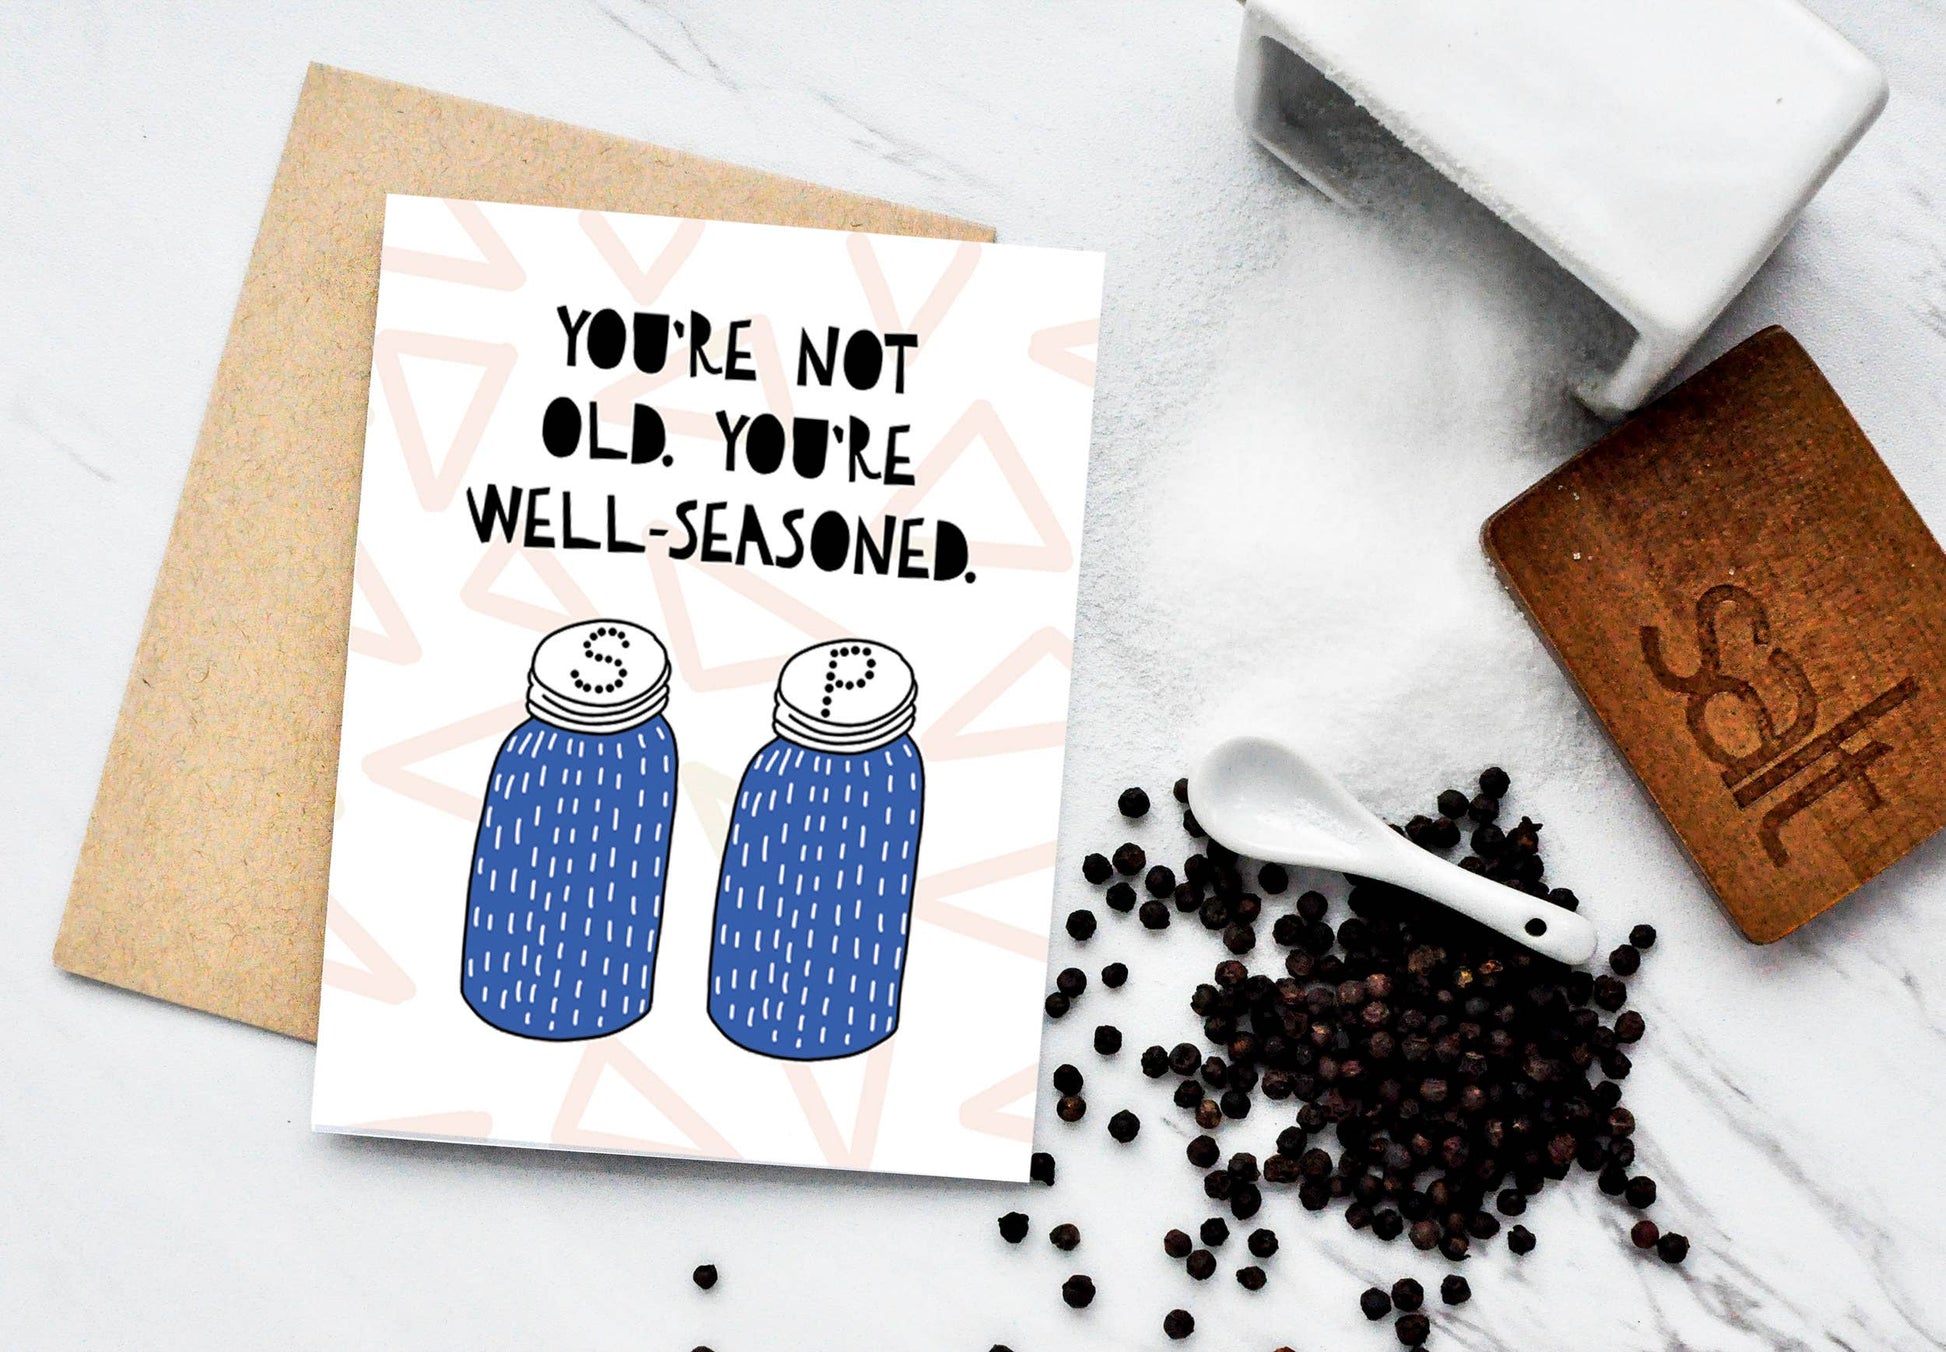 Greeting card with salt and pepper shakers on it that reads "You're not old, You're well-seasoned" 